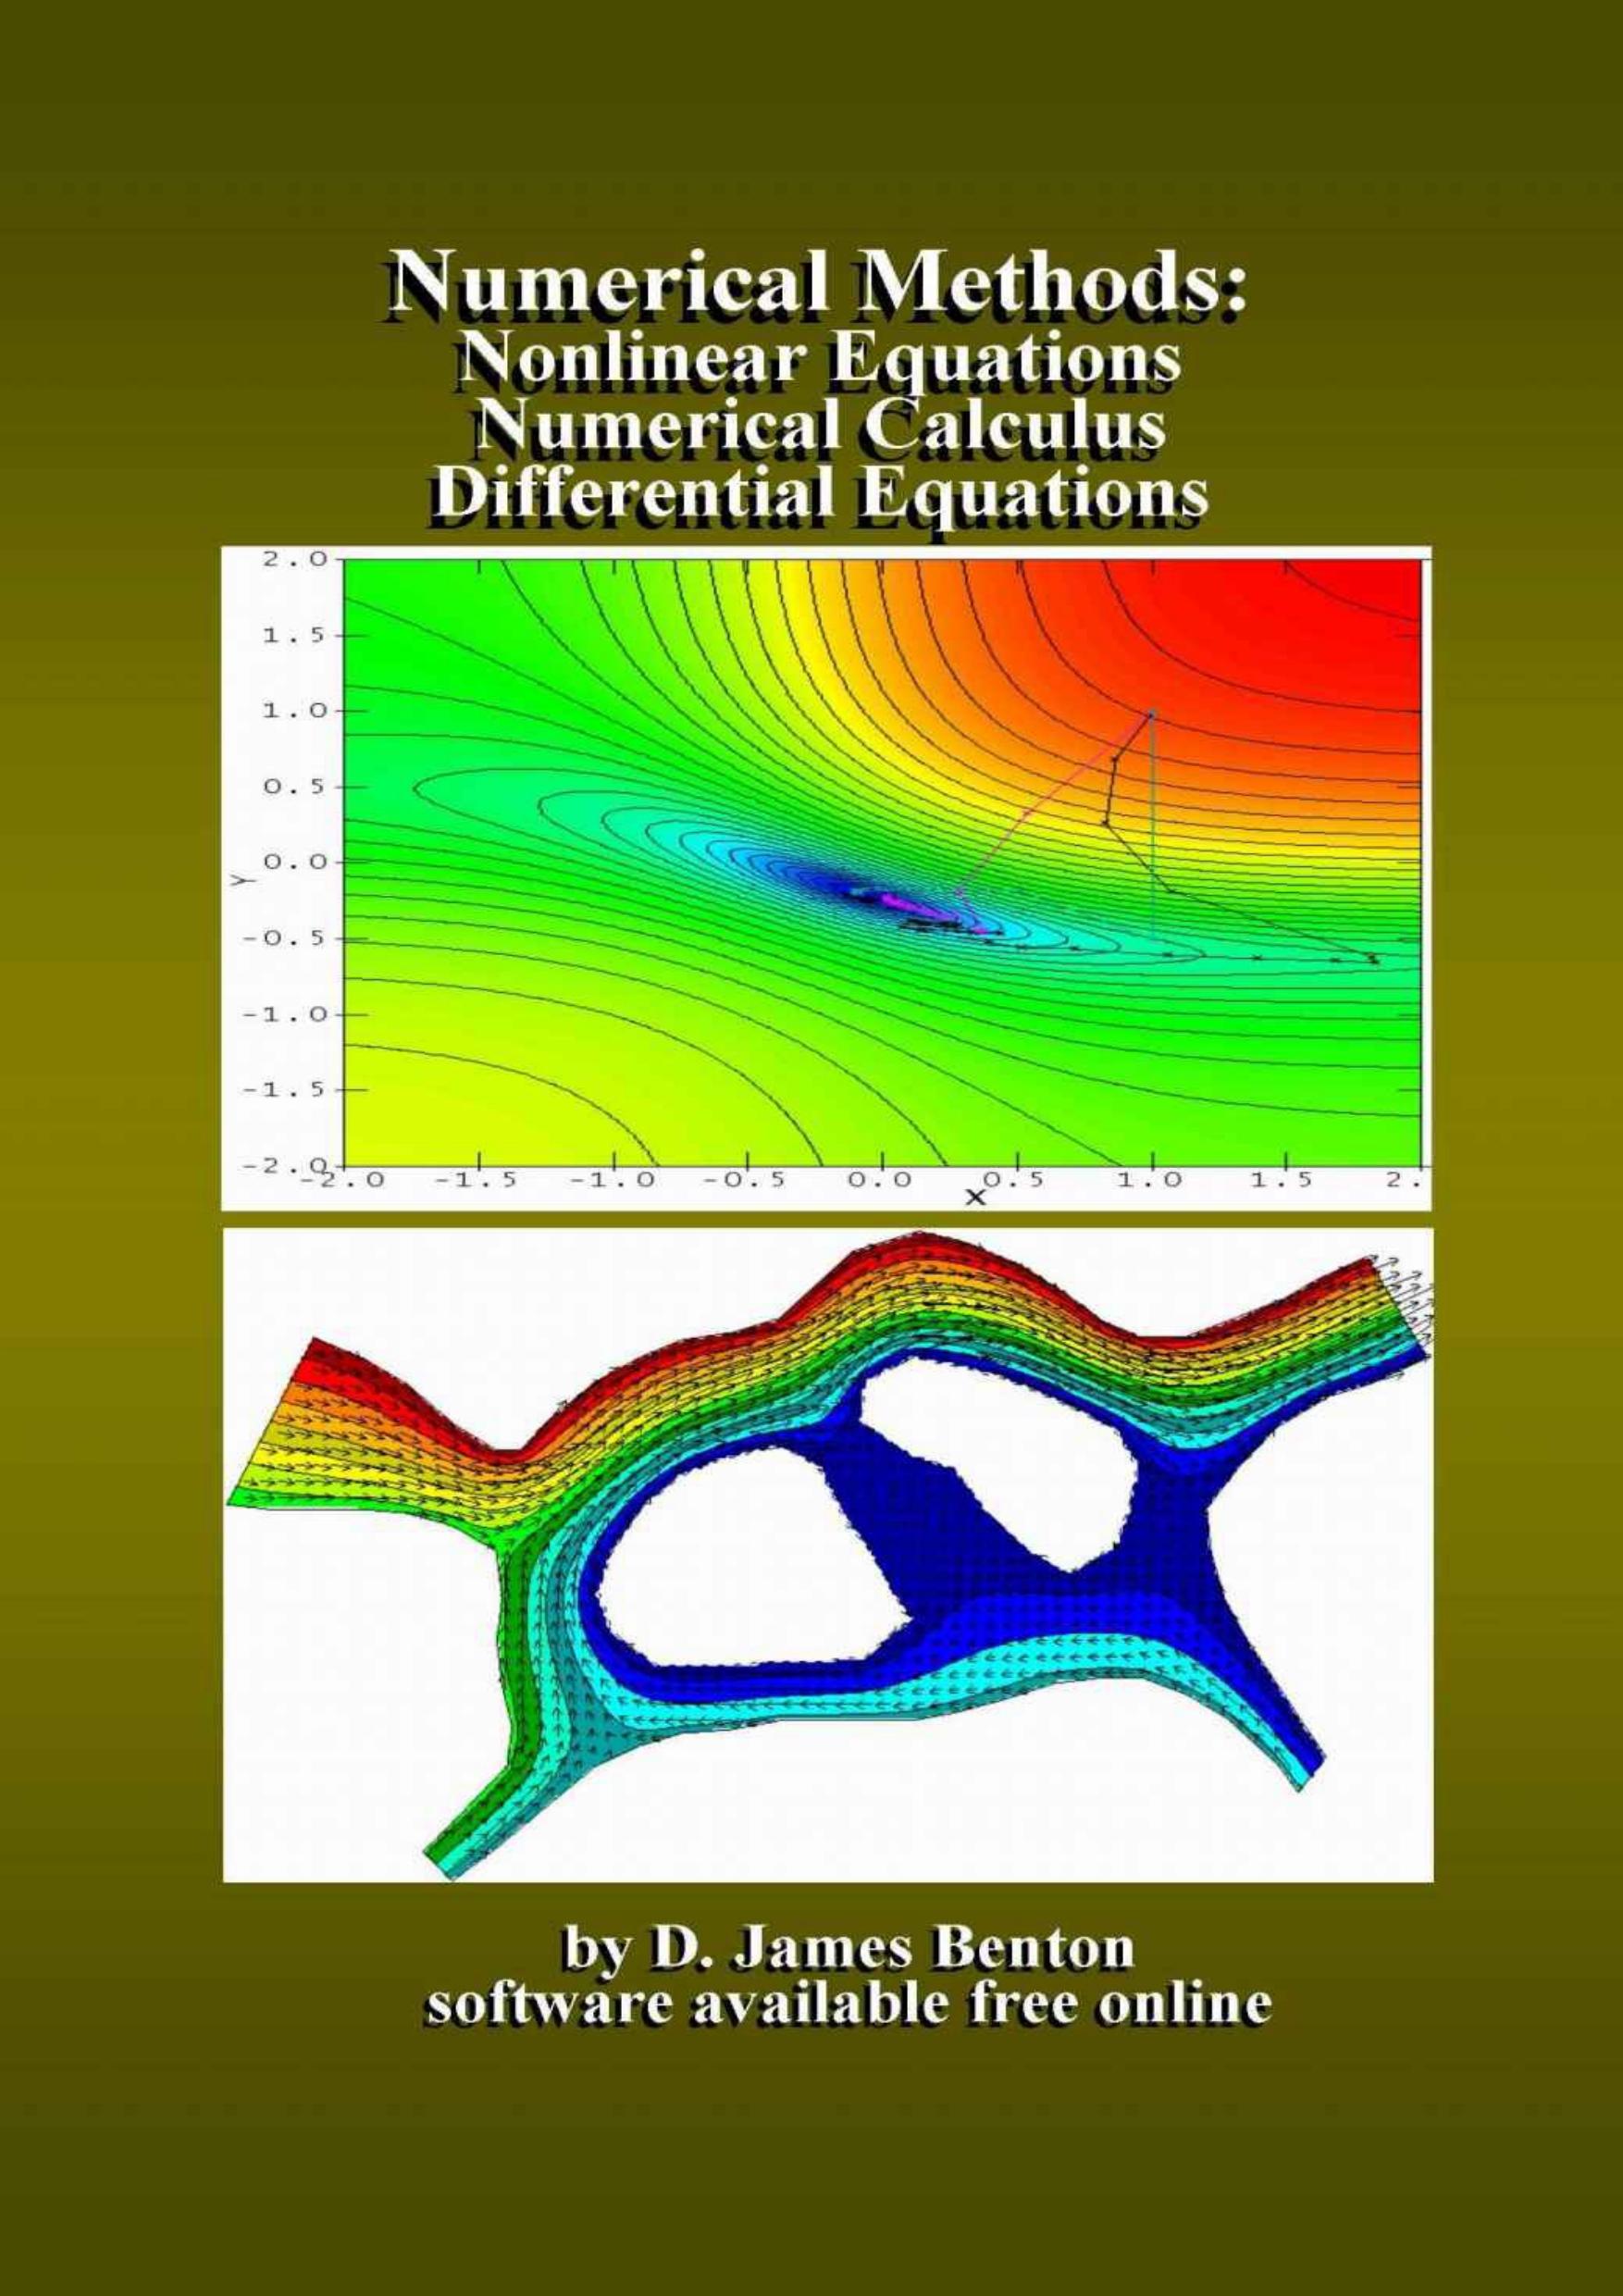 Numerical Methods: Nonlinear Equations, Numerical Calculus, & Differential Equations by D. James Benton